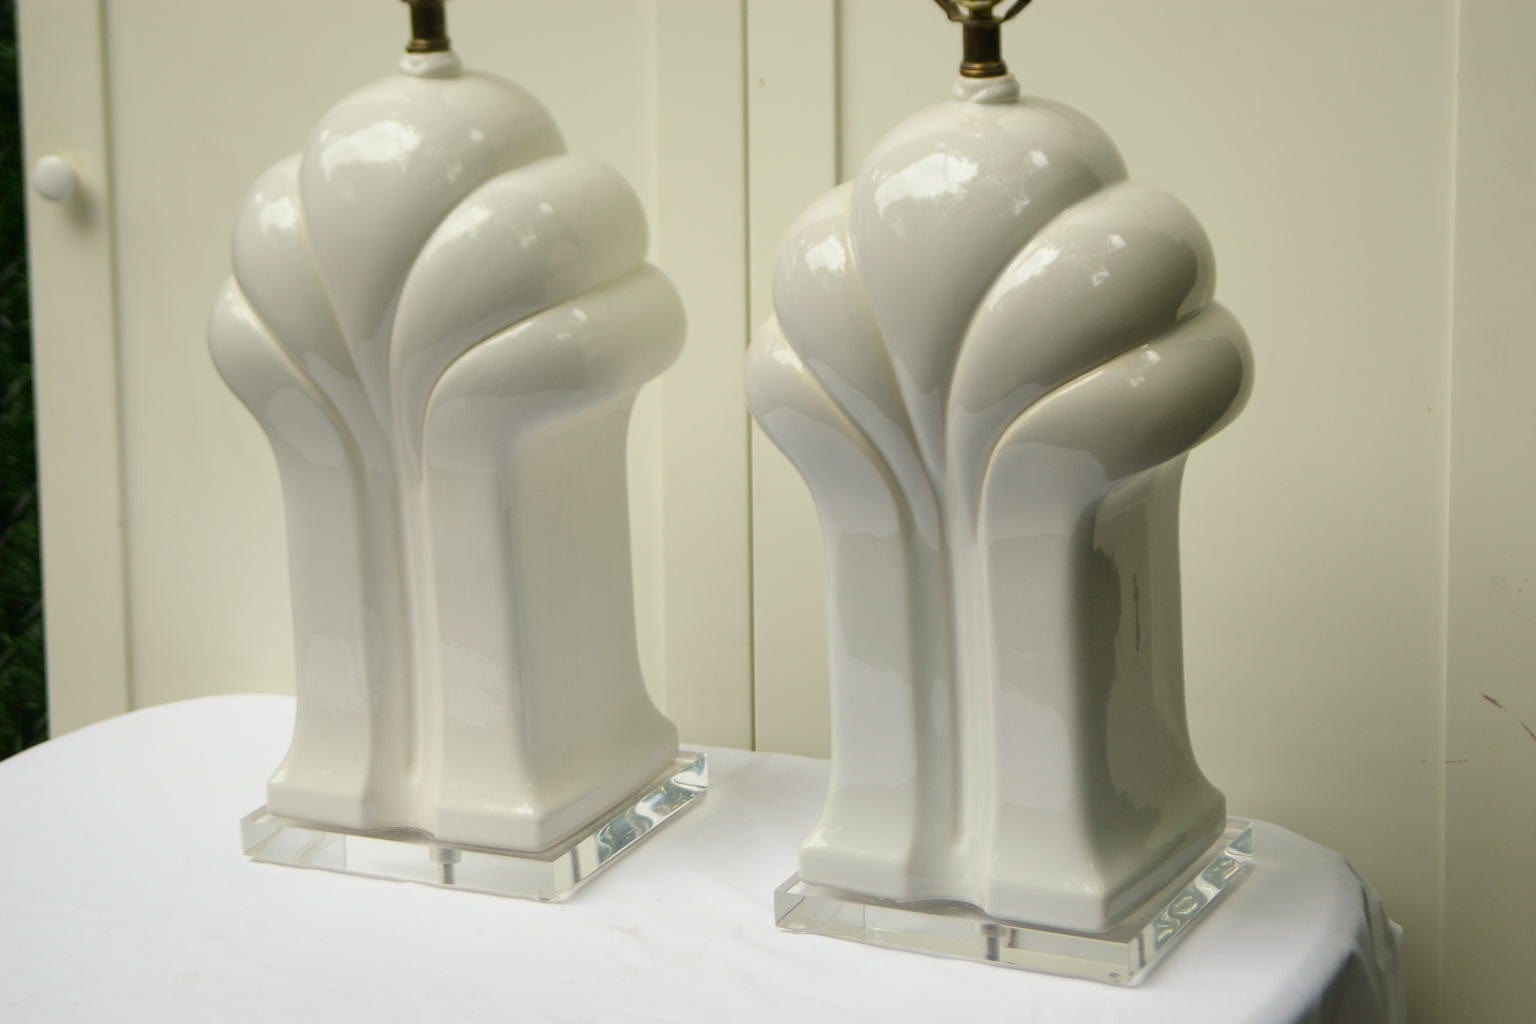 I Like Mike's Mid-Century Modern lighting Pair Big White Hollywood Regency Deco Ceramic Lamps with Lucite Bases